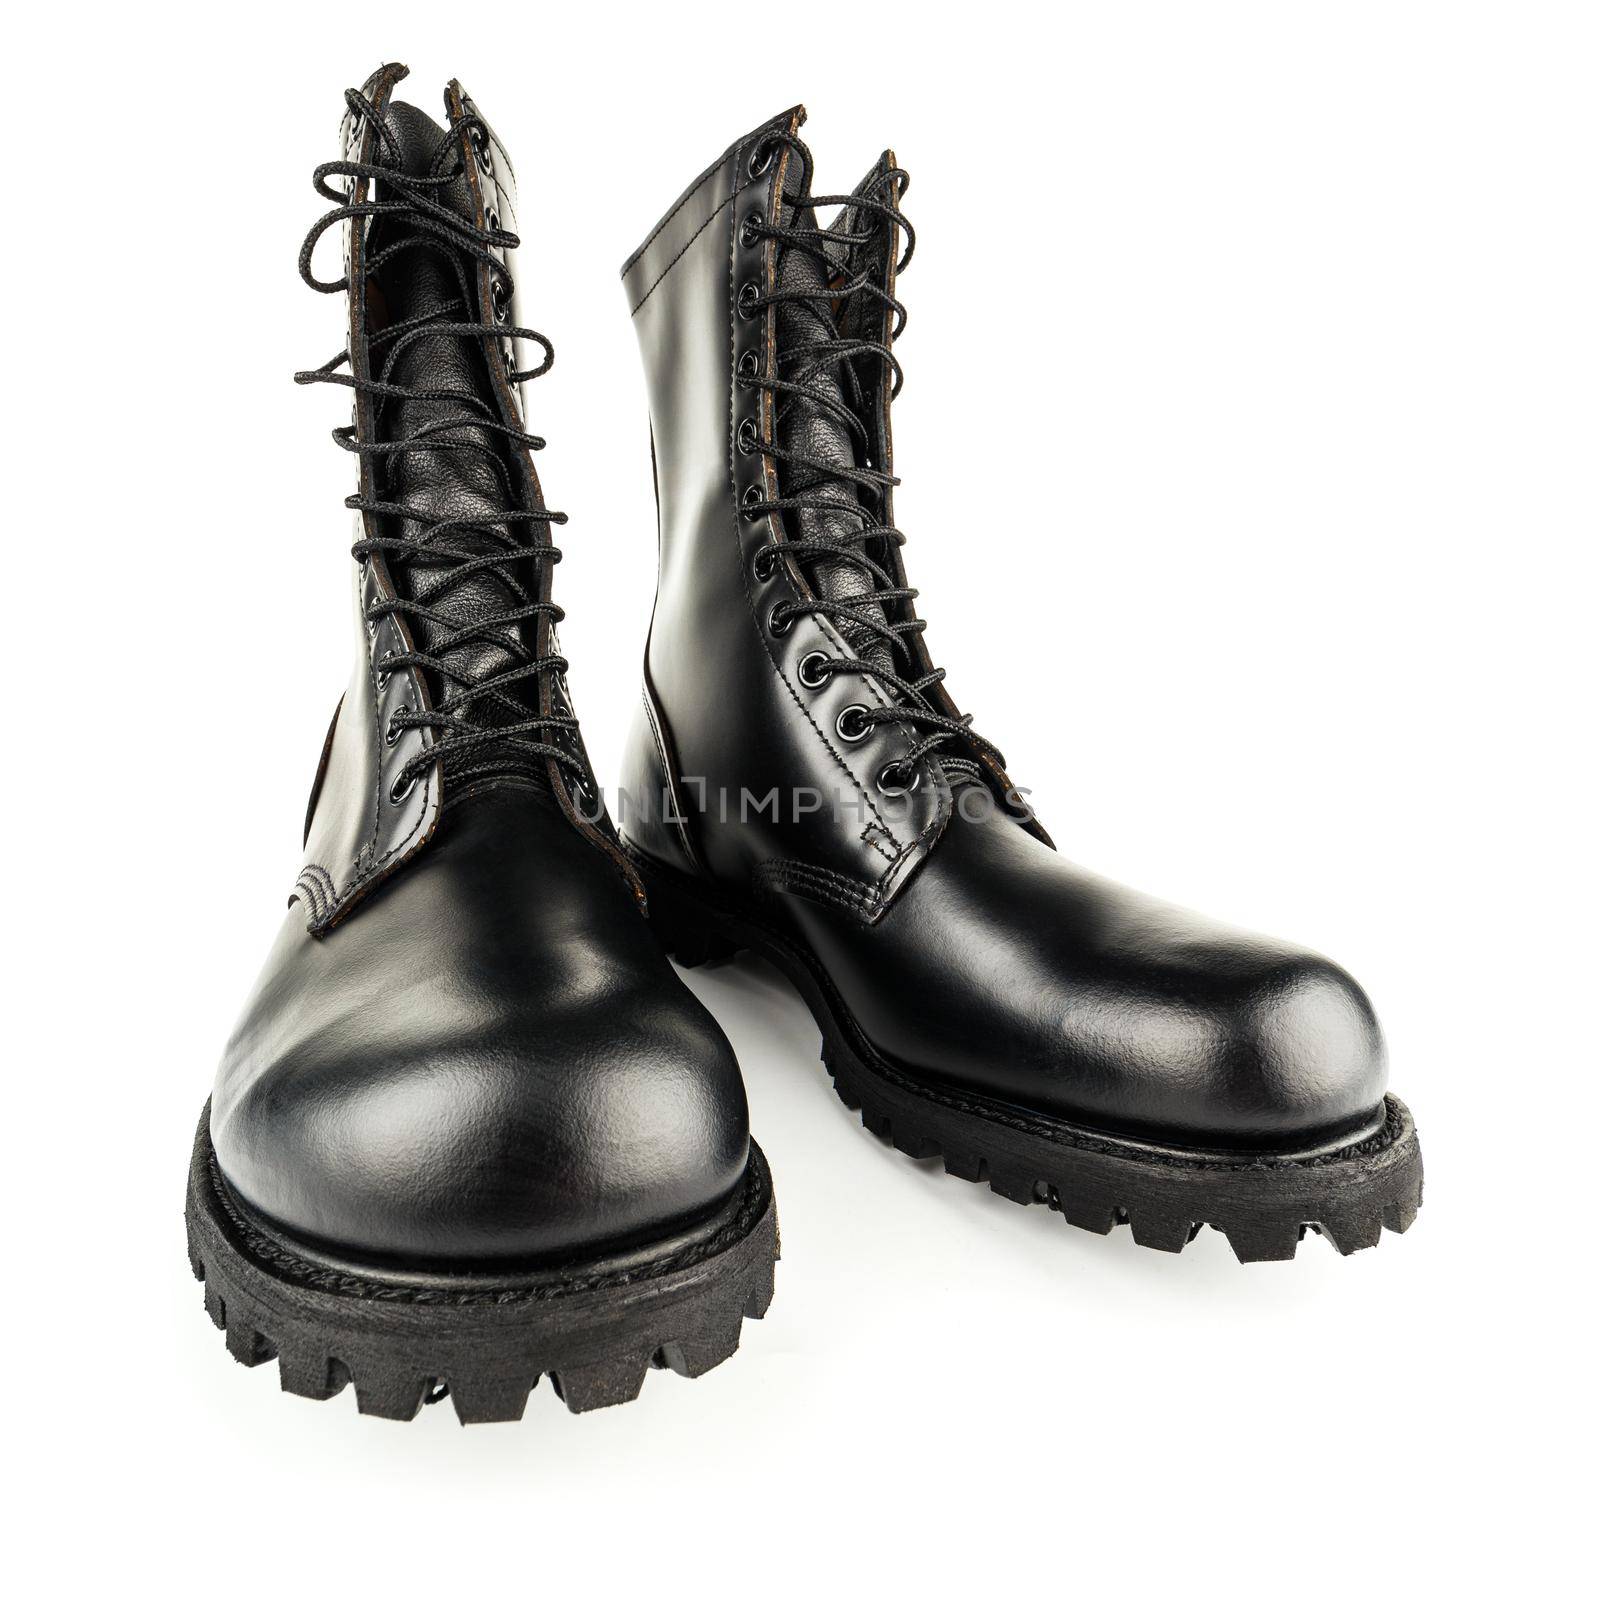 three quarter front view on pair of black leather 10-inch new black military combat boots, isolated on white background by z1b